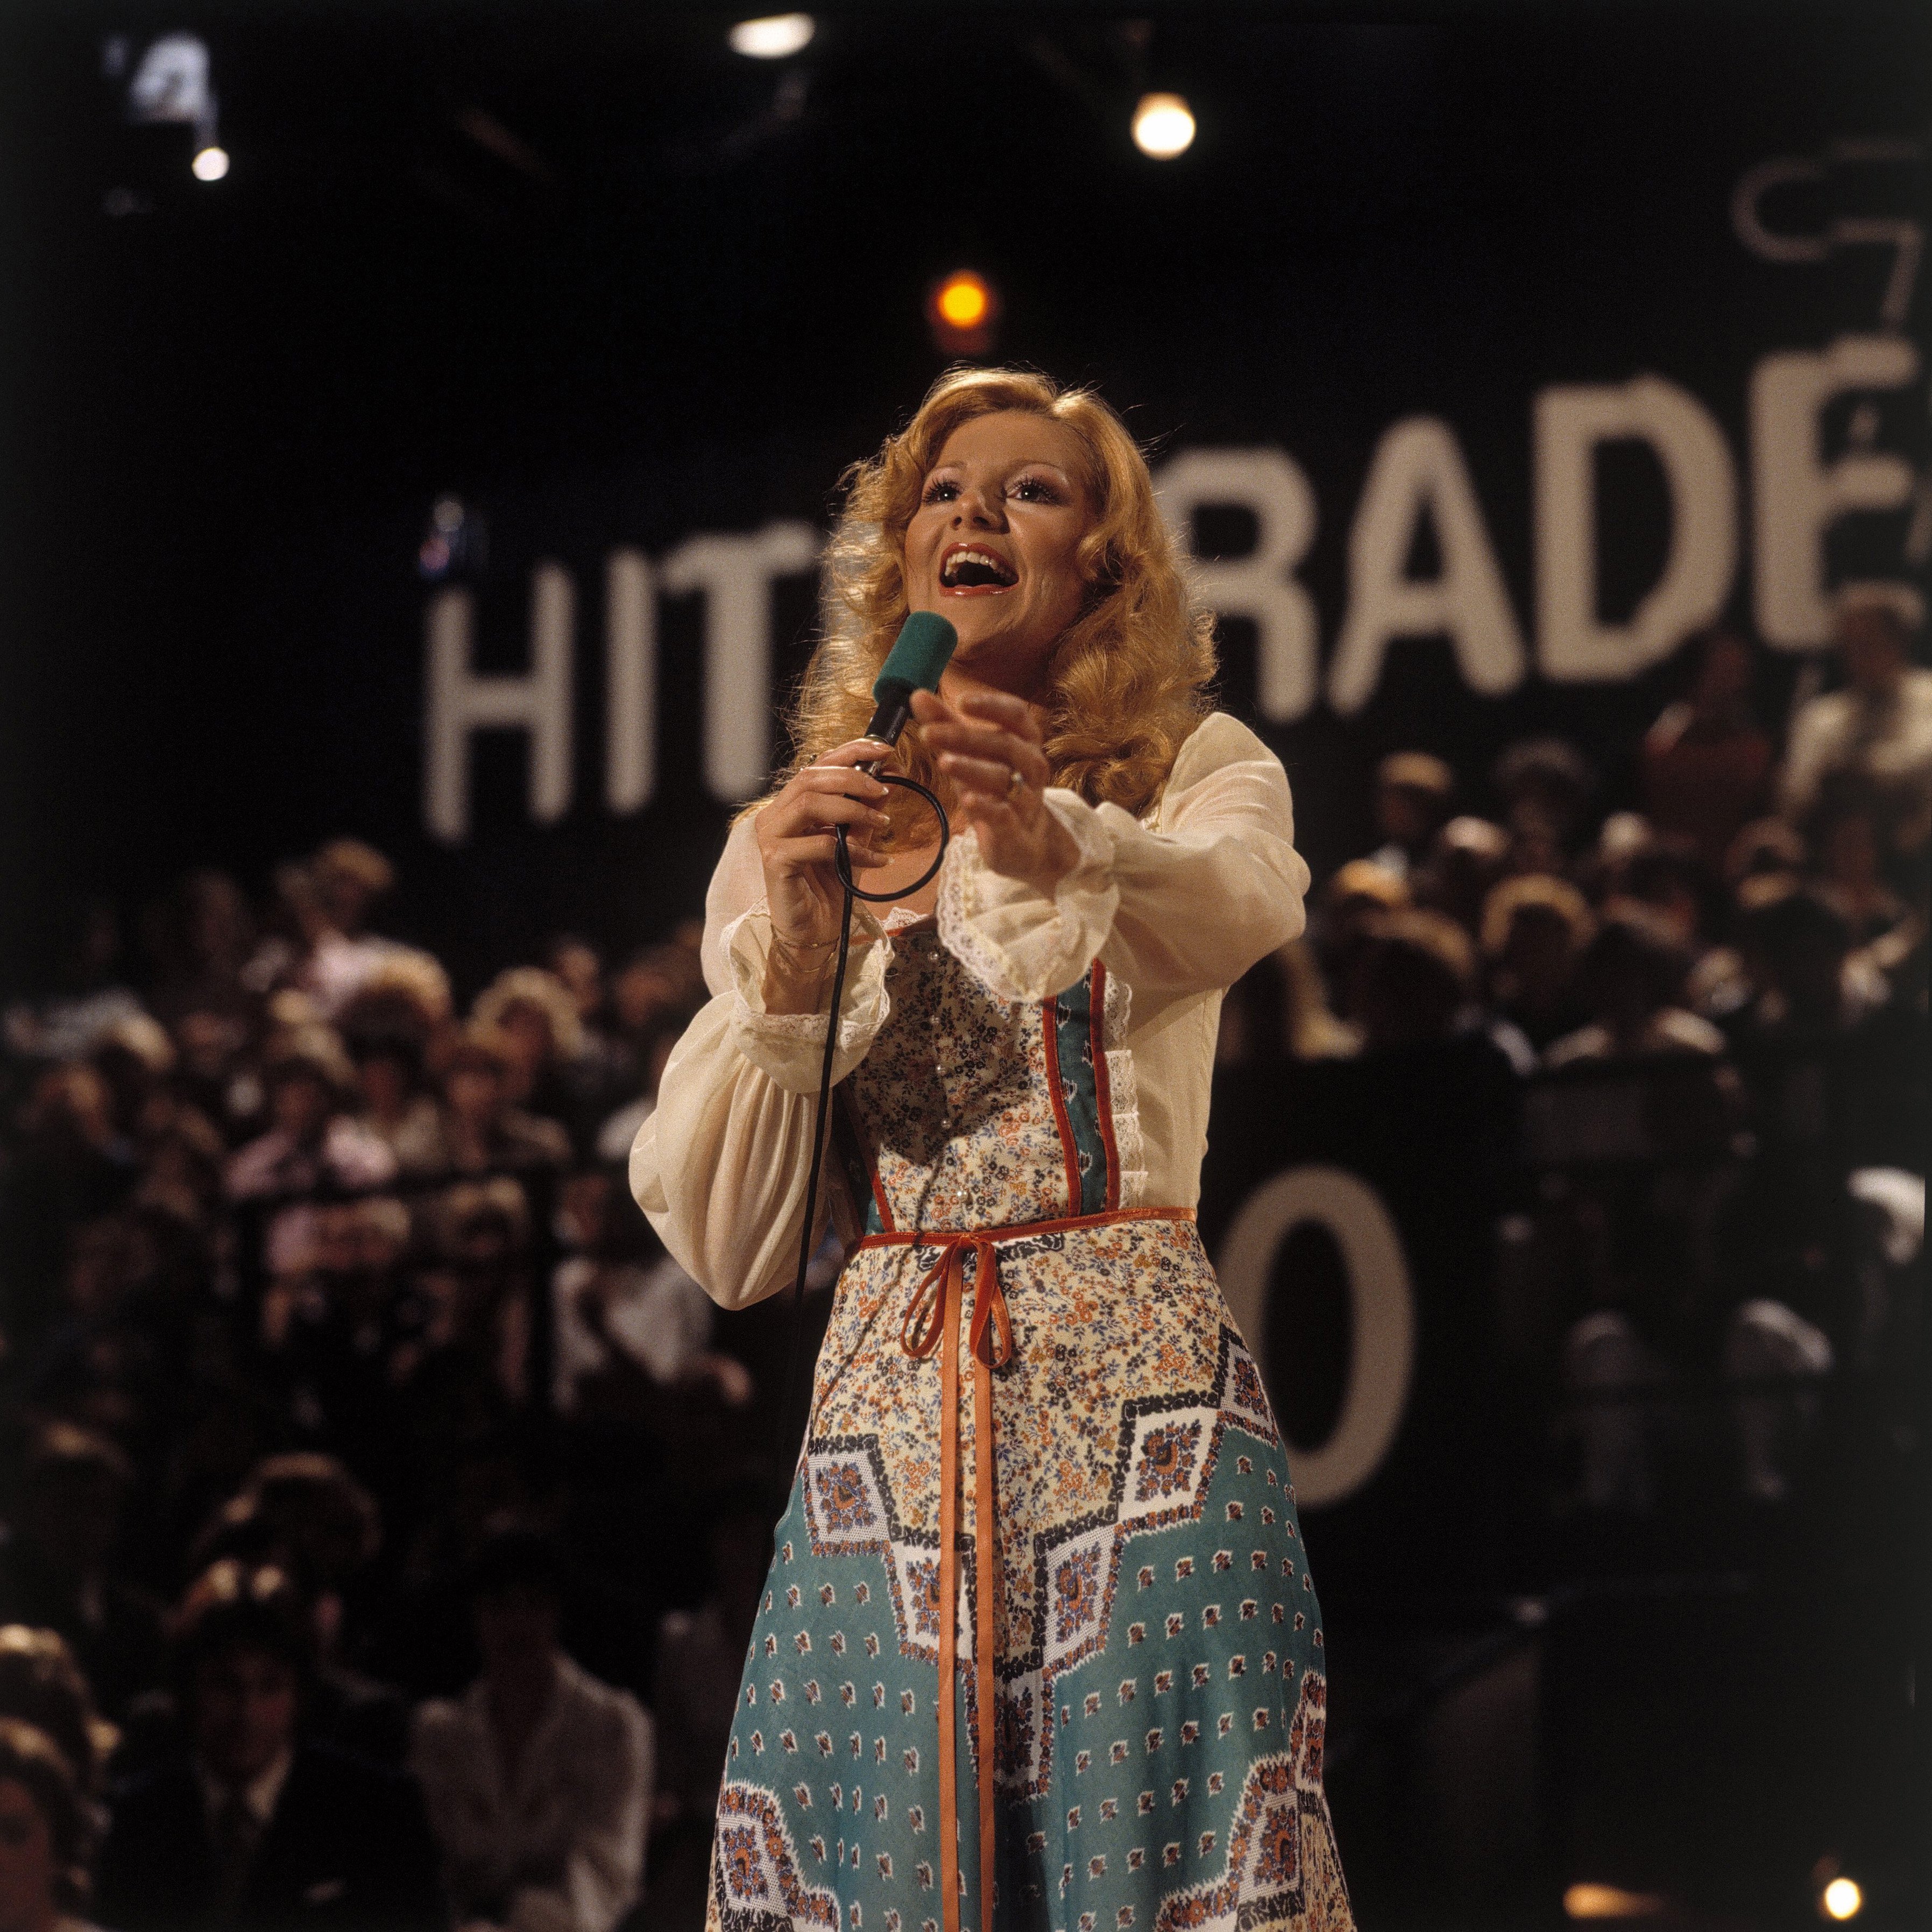 Hit Parade, Peggy March, 1978 | Quelle: Getty Images